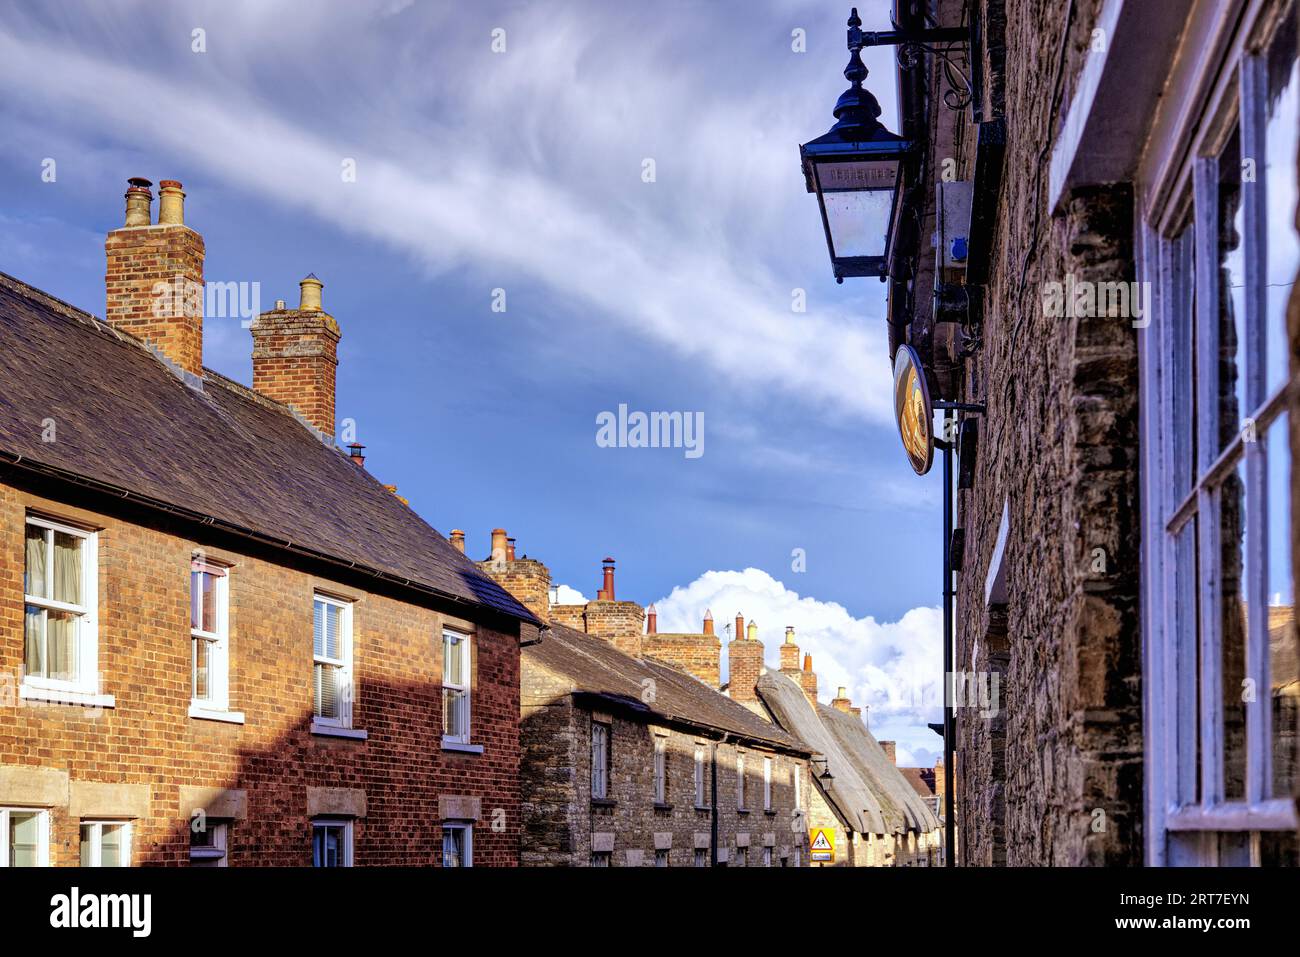 Sharnbrook, Bedfordshire, England, UK - Stone built cottages in the village high street Stock Photo